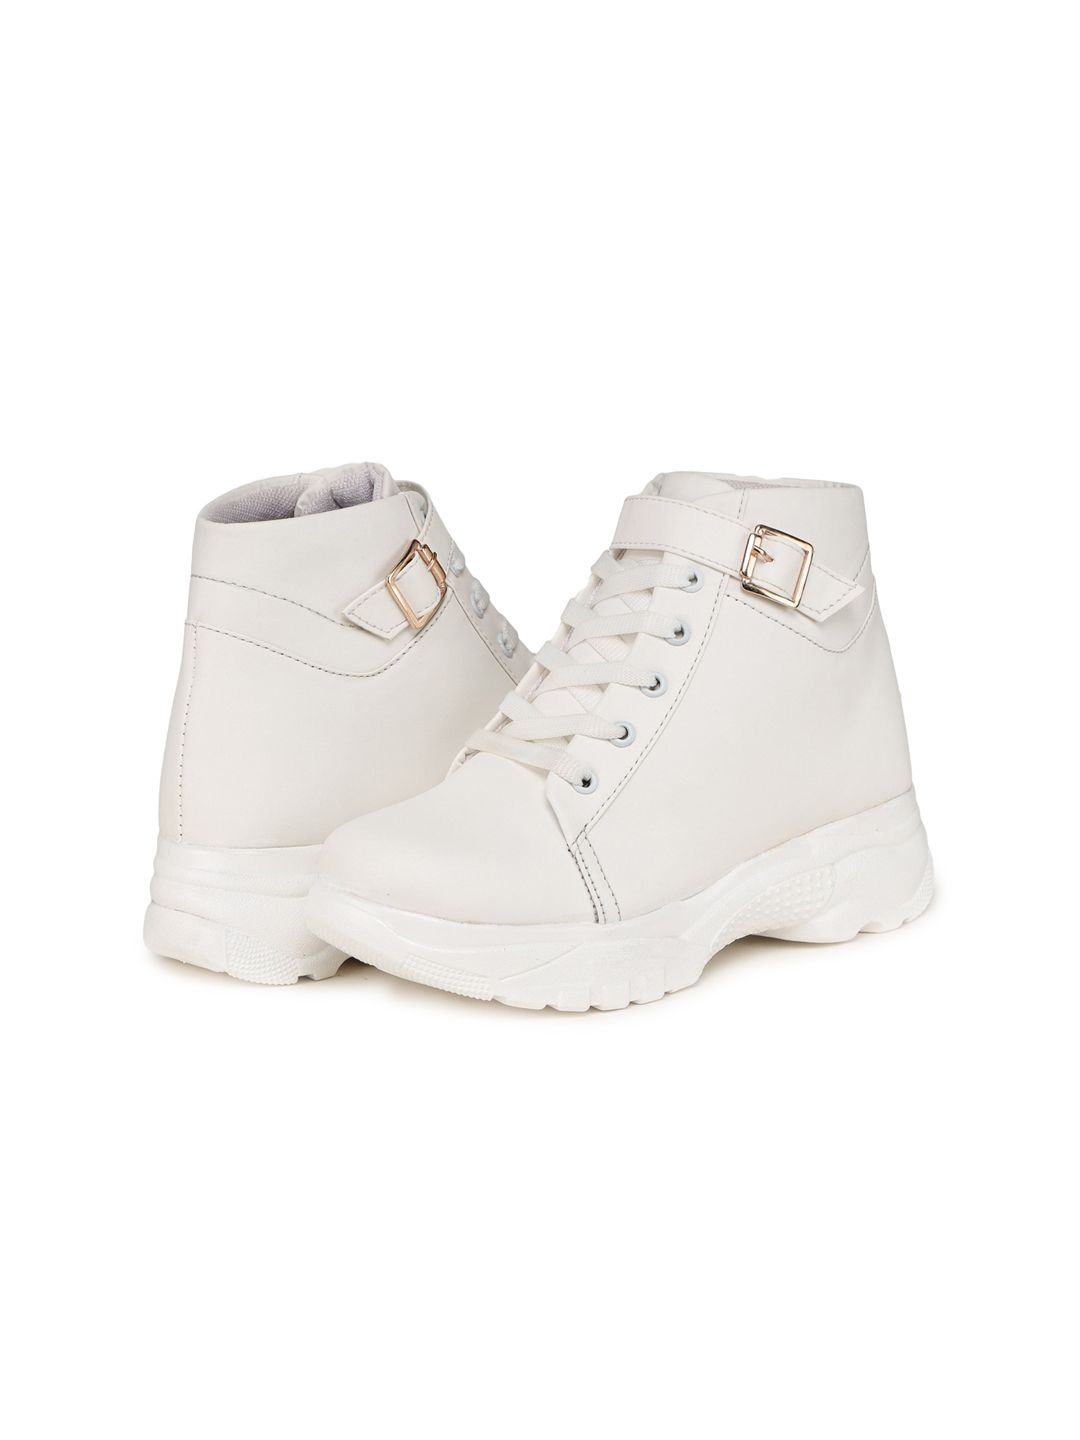 BOOTCO Women White Solid Boots Price in India